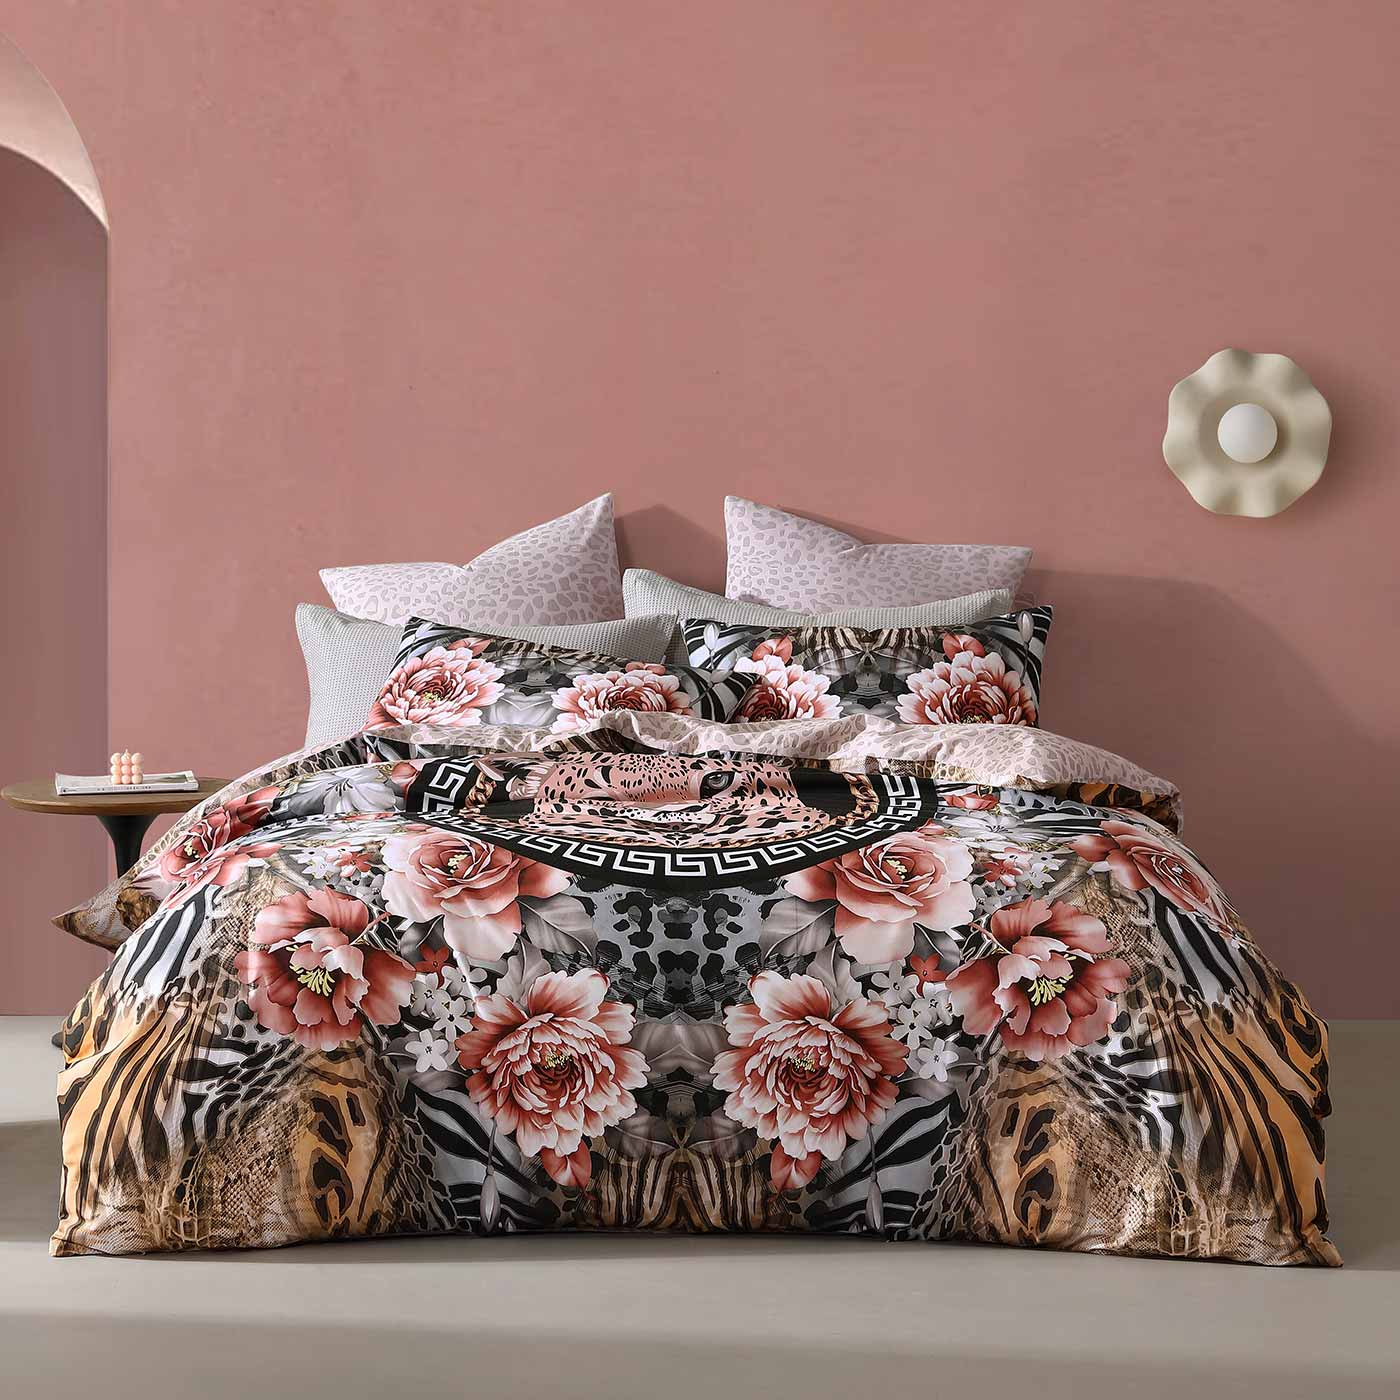 Bring an exotic touch to any bedroom with Nala Leopard, featuring mesmerizing patterns of leopard, tiger, and zebra skin with blush blooms on a backdrop.